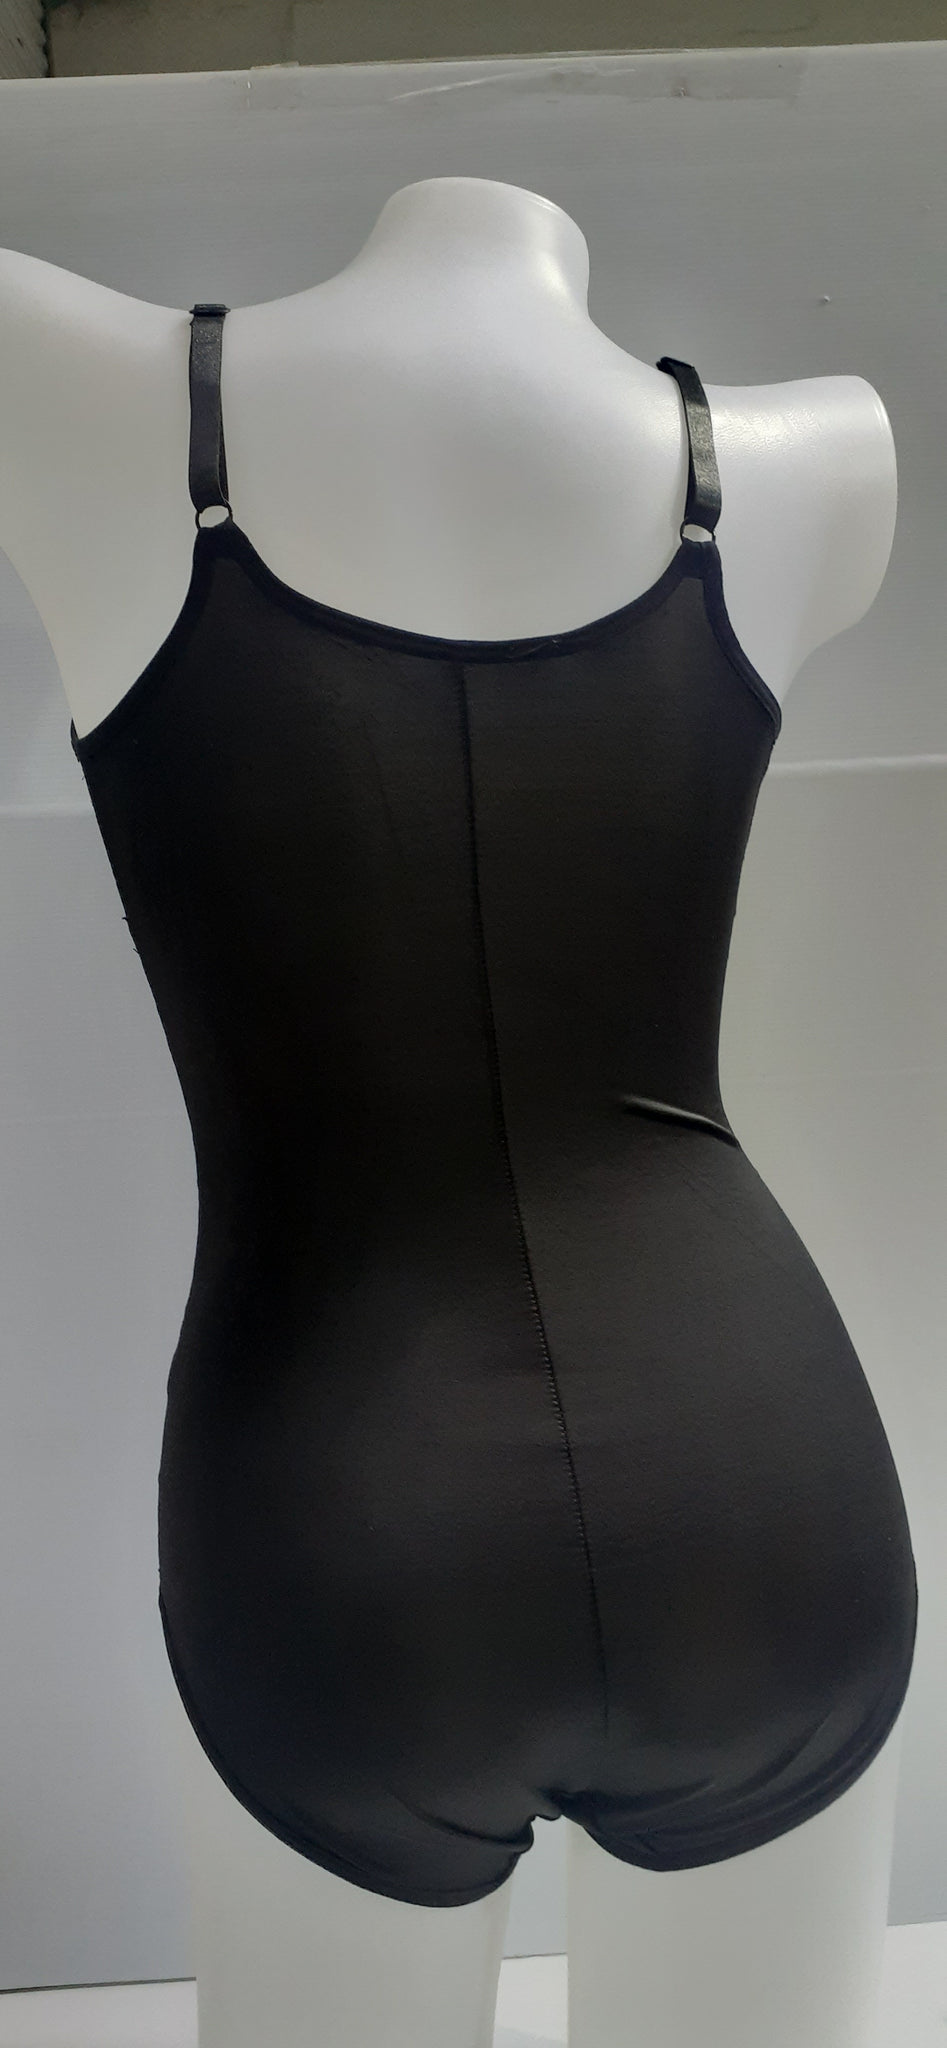 Buy Women Deep V Bodysuit Snap Crotch At Affordable Price